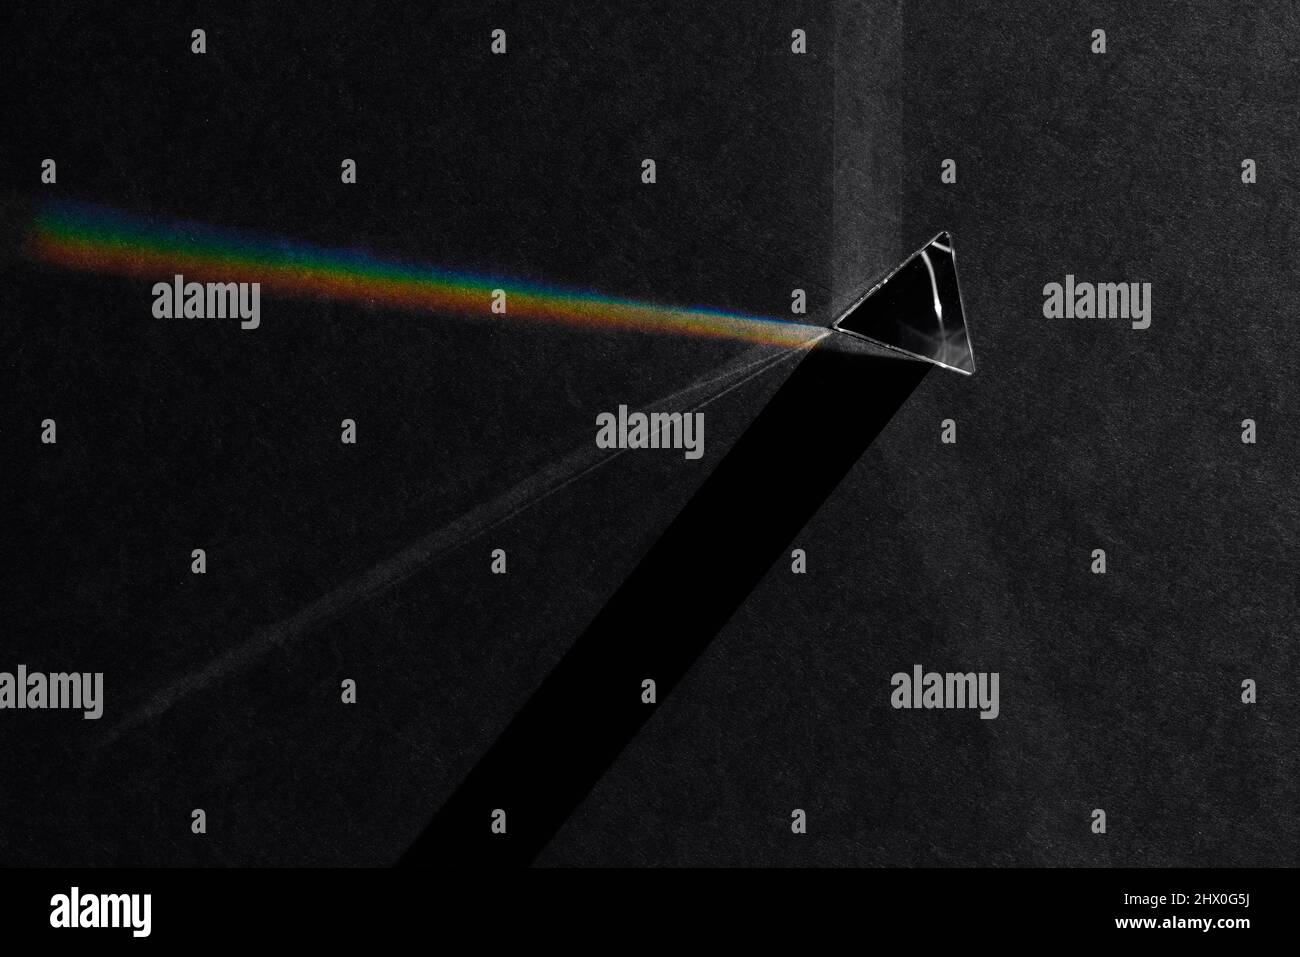 Top View of Prism Refracting Light to Create Shadows and Rainbow Stock Photo